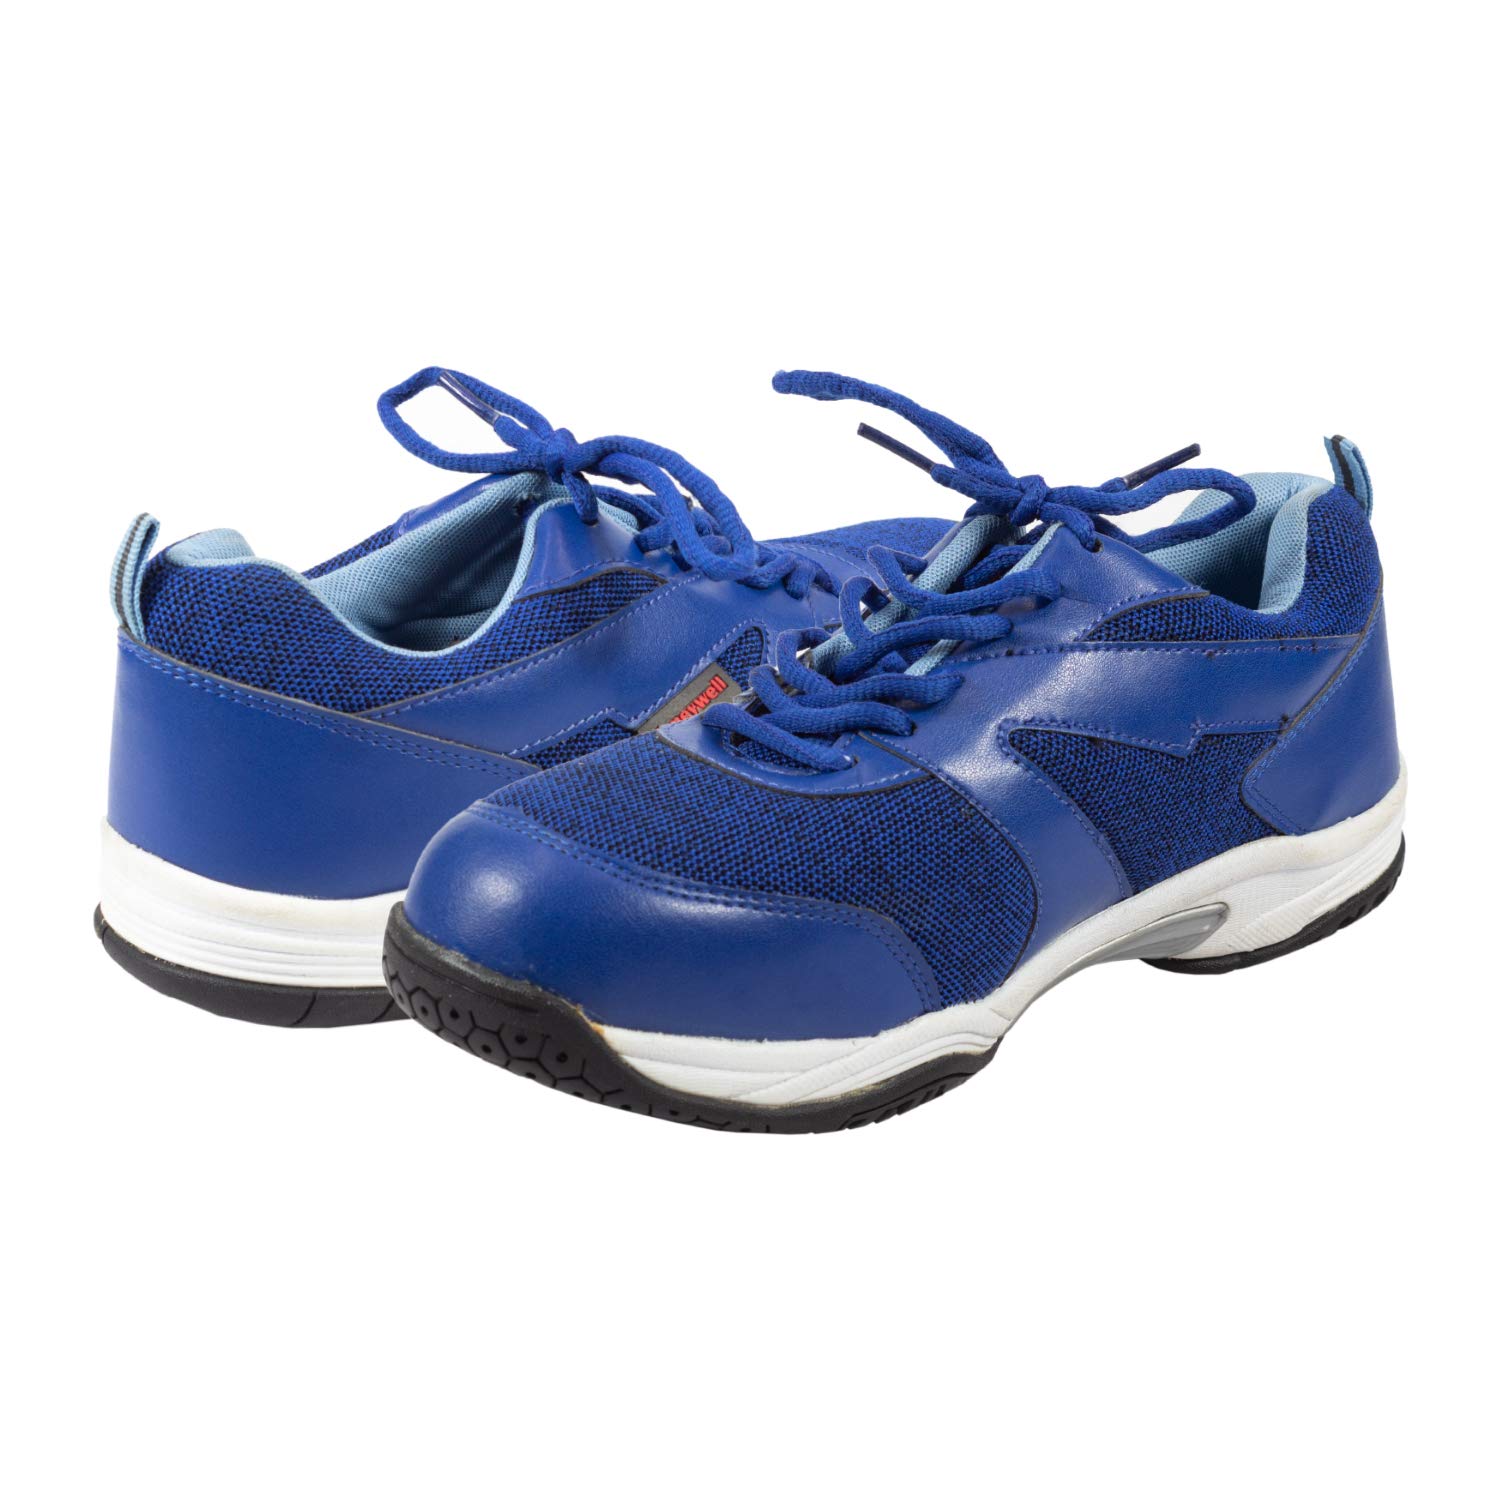 Buy Honeywell HSP500XC - Blue Sporty Safety Shoes Online at Best Prices